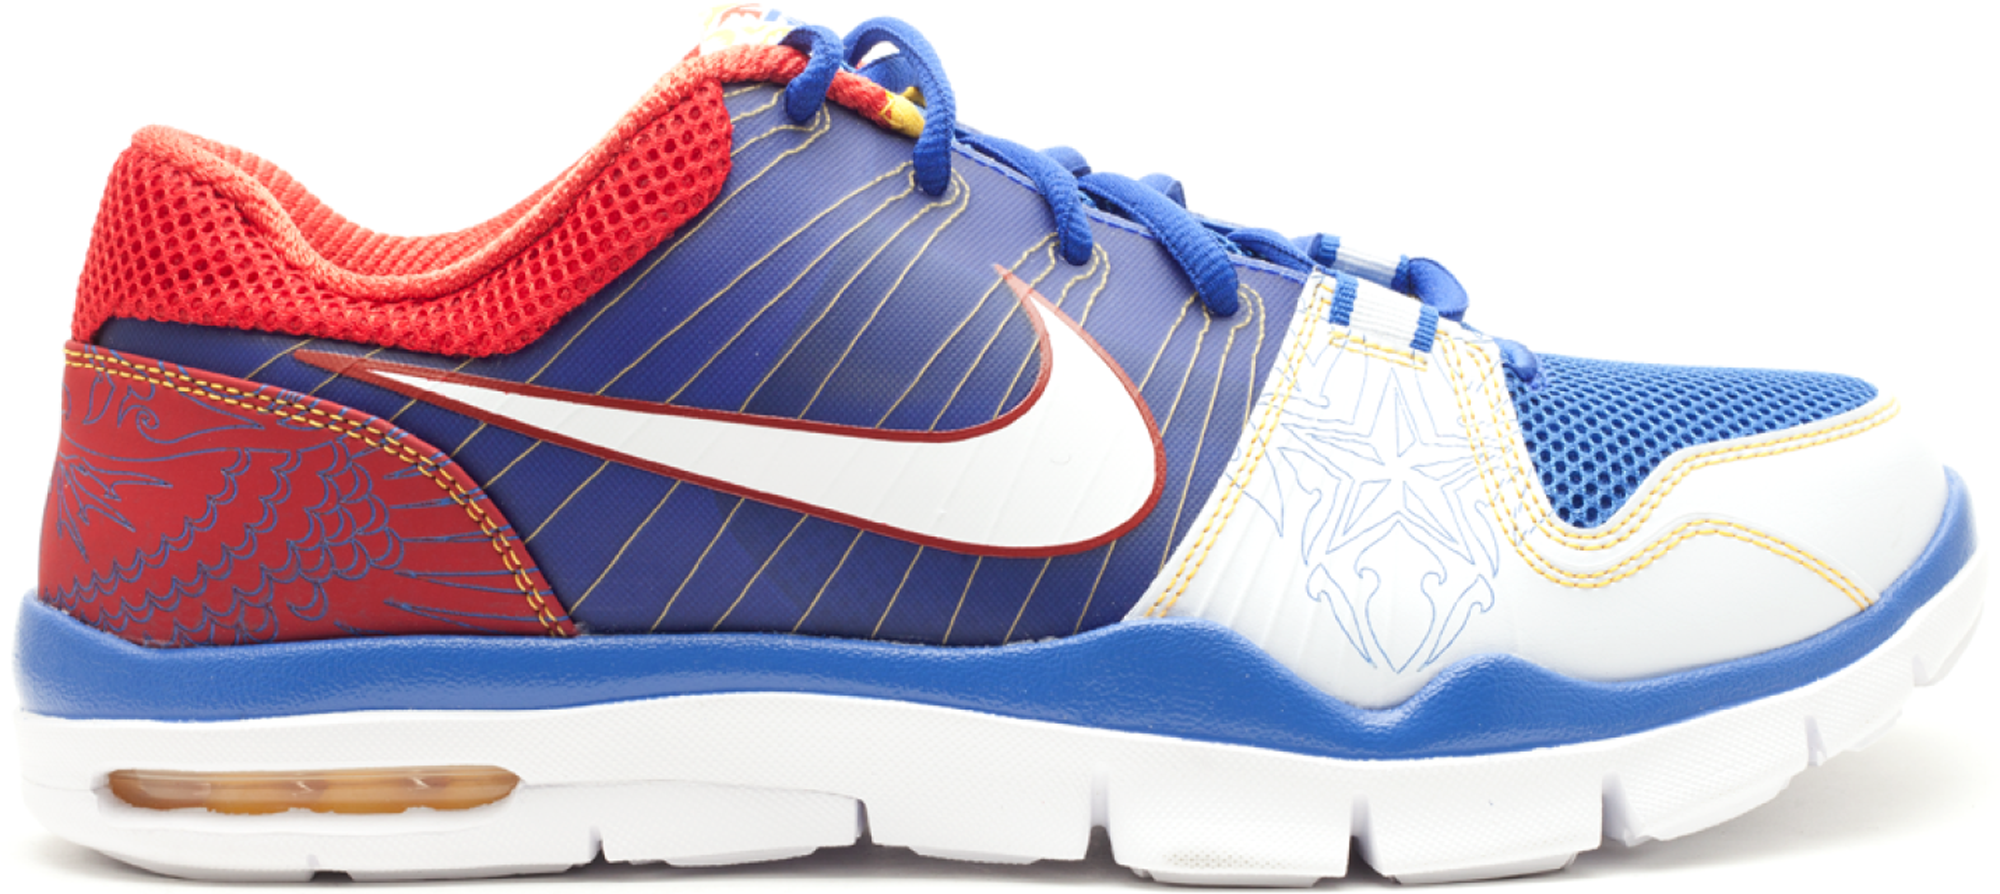 Nike Trainer 1 Low Manny Pacquiao 